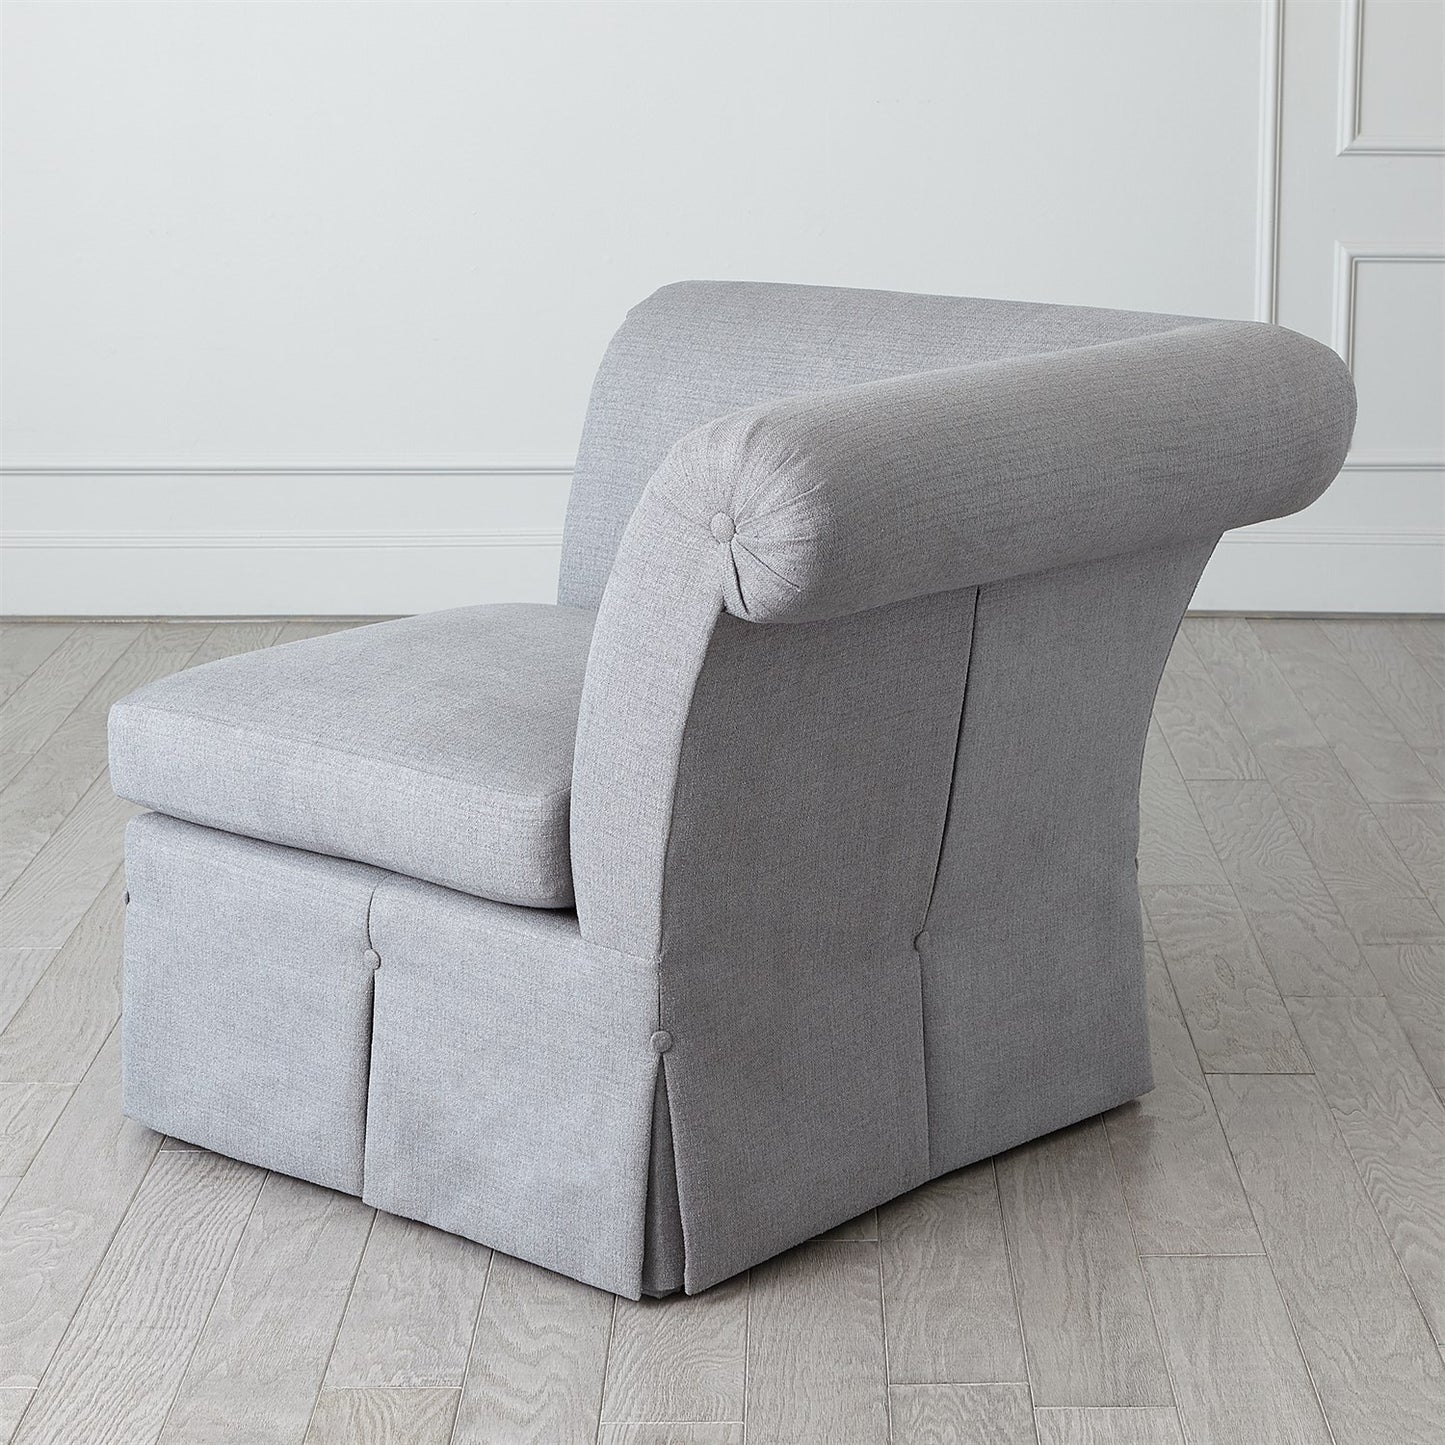 Slipper Sectional - Corner Section - Heather Grey